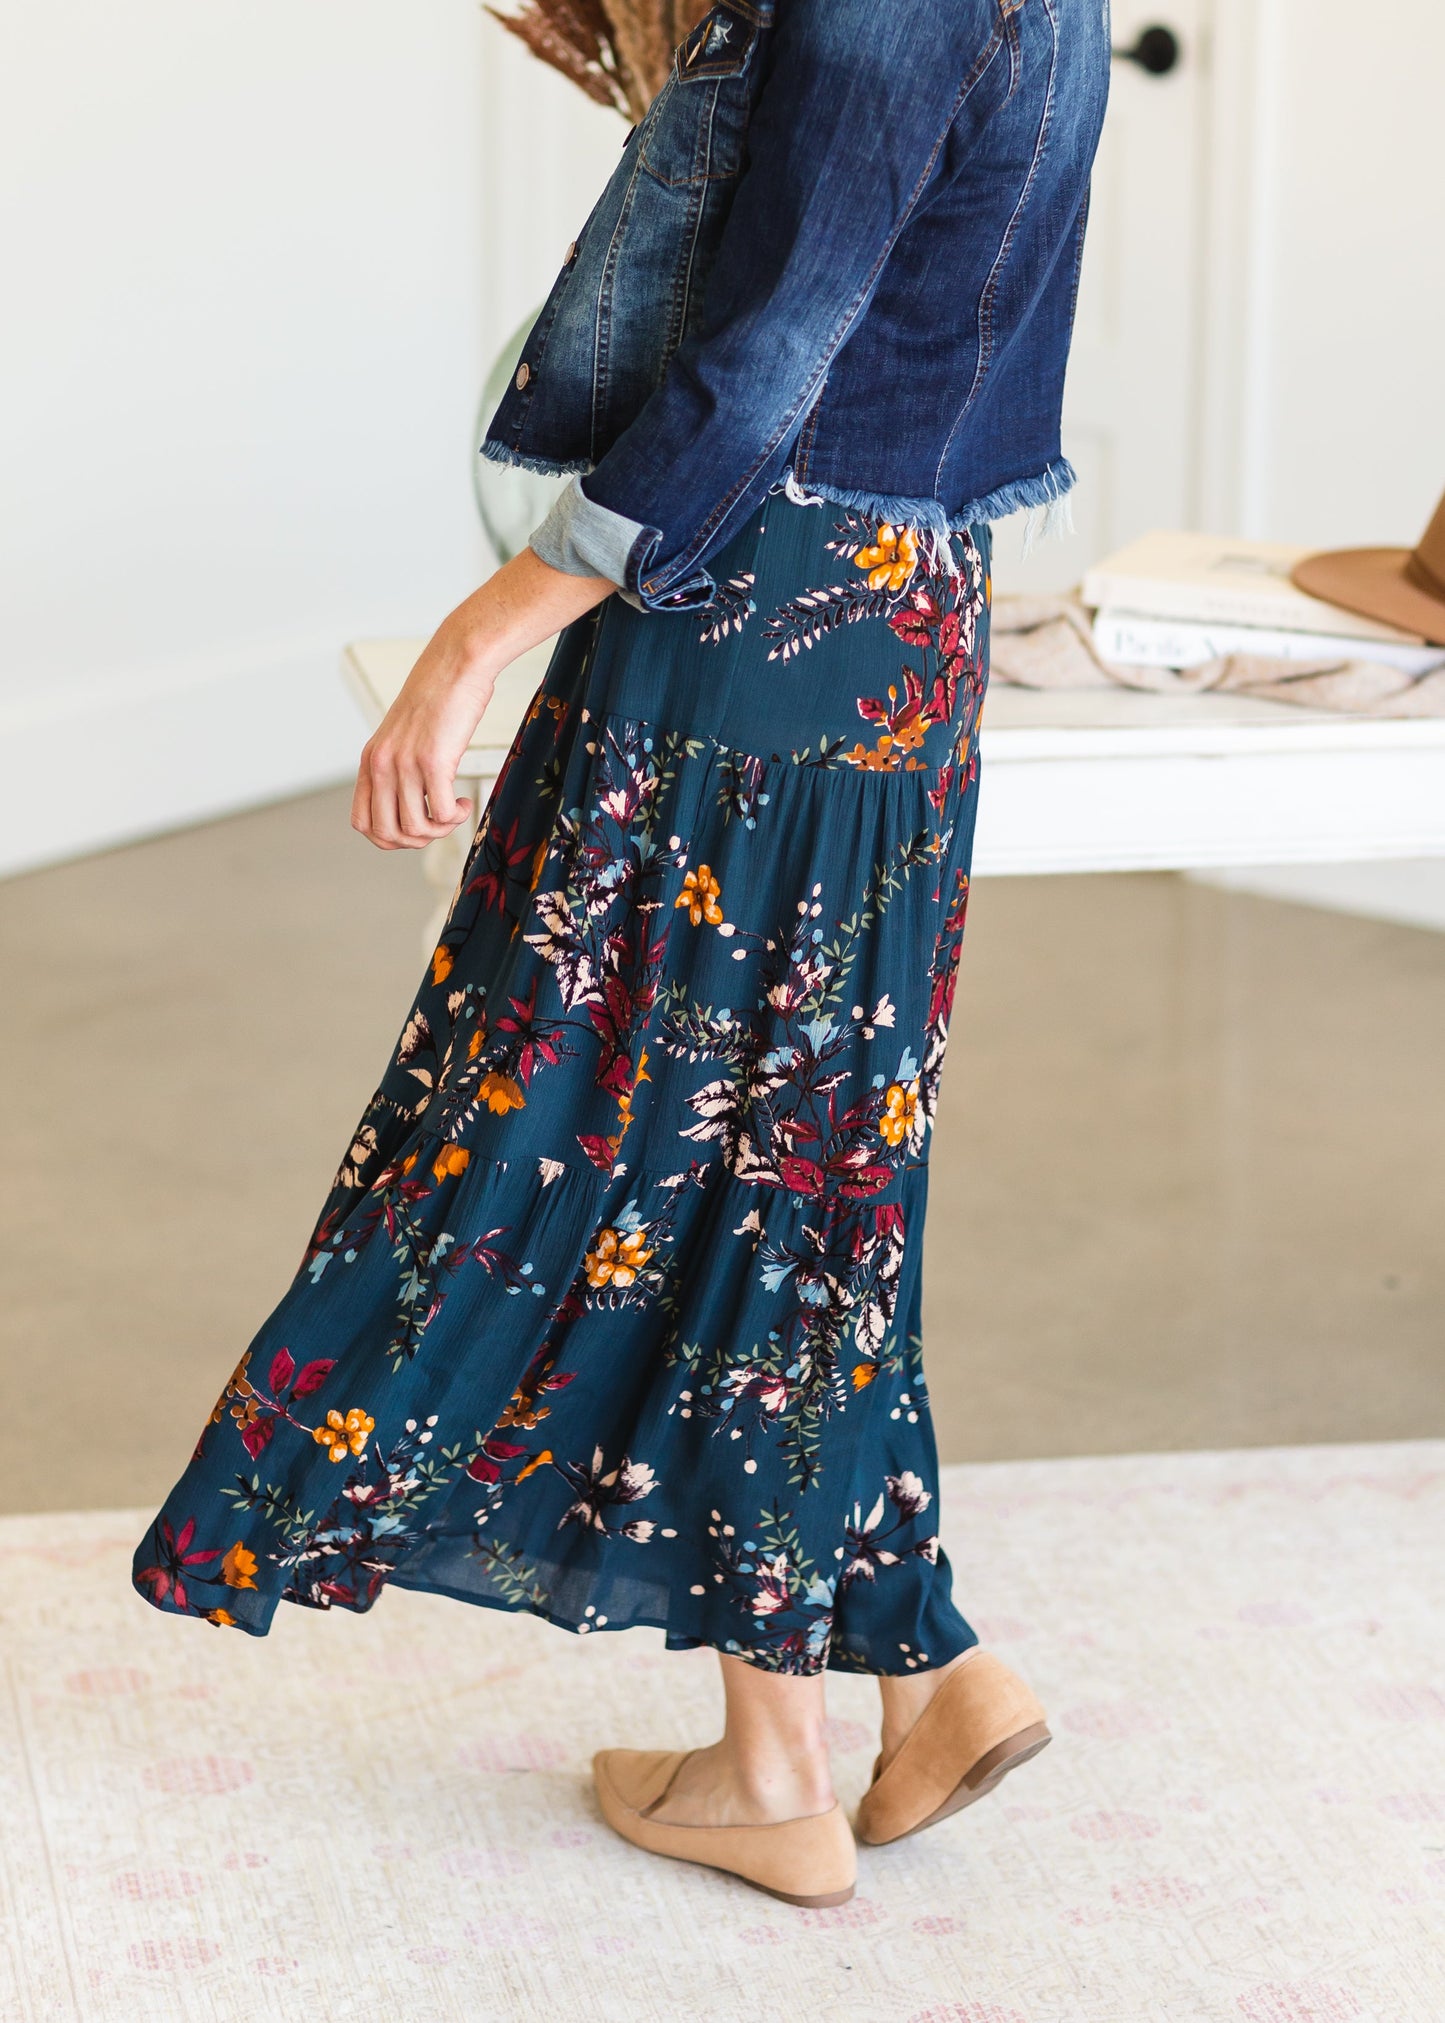 Teal Tiered Floral Skirt Skirts